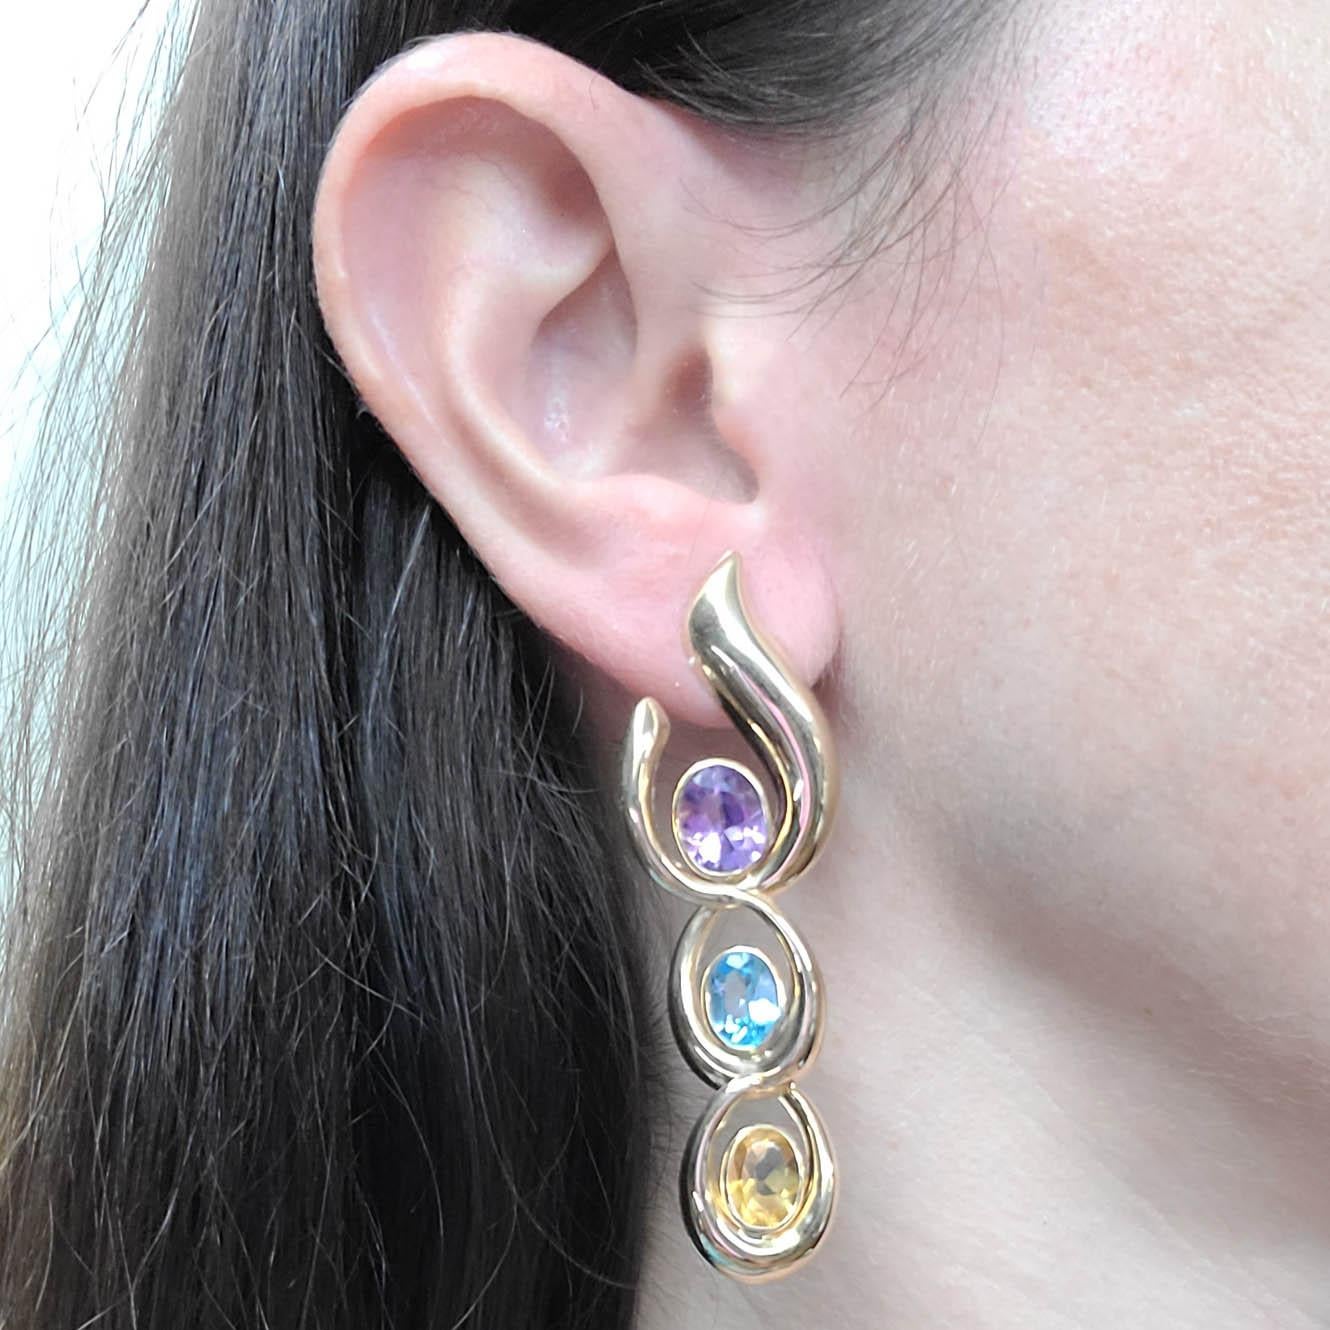 14 Karat Yellow Gold Drop Earrings Featuring Oval Cut Amethyst, Blue Topaz, and Citrine.  The Design Gives The Illusion Of The Earring Wrapping Around Your Ear Lobe.  Articulated Links Allow For Flexible Movement & Swing. Post With Friction Backs.